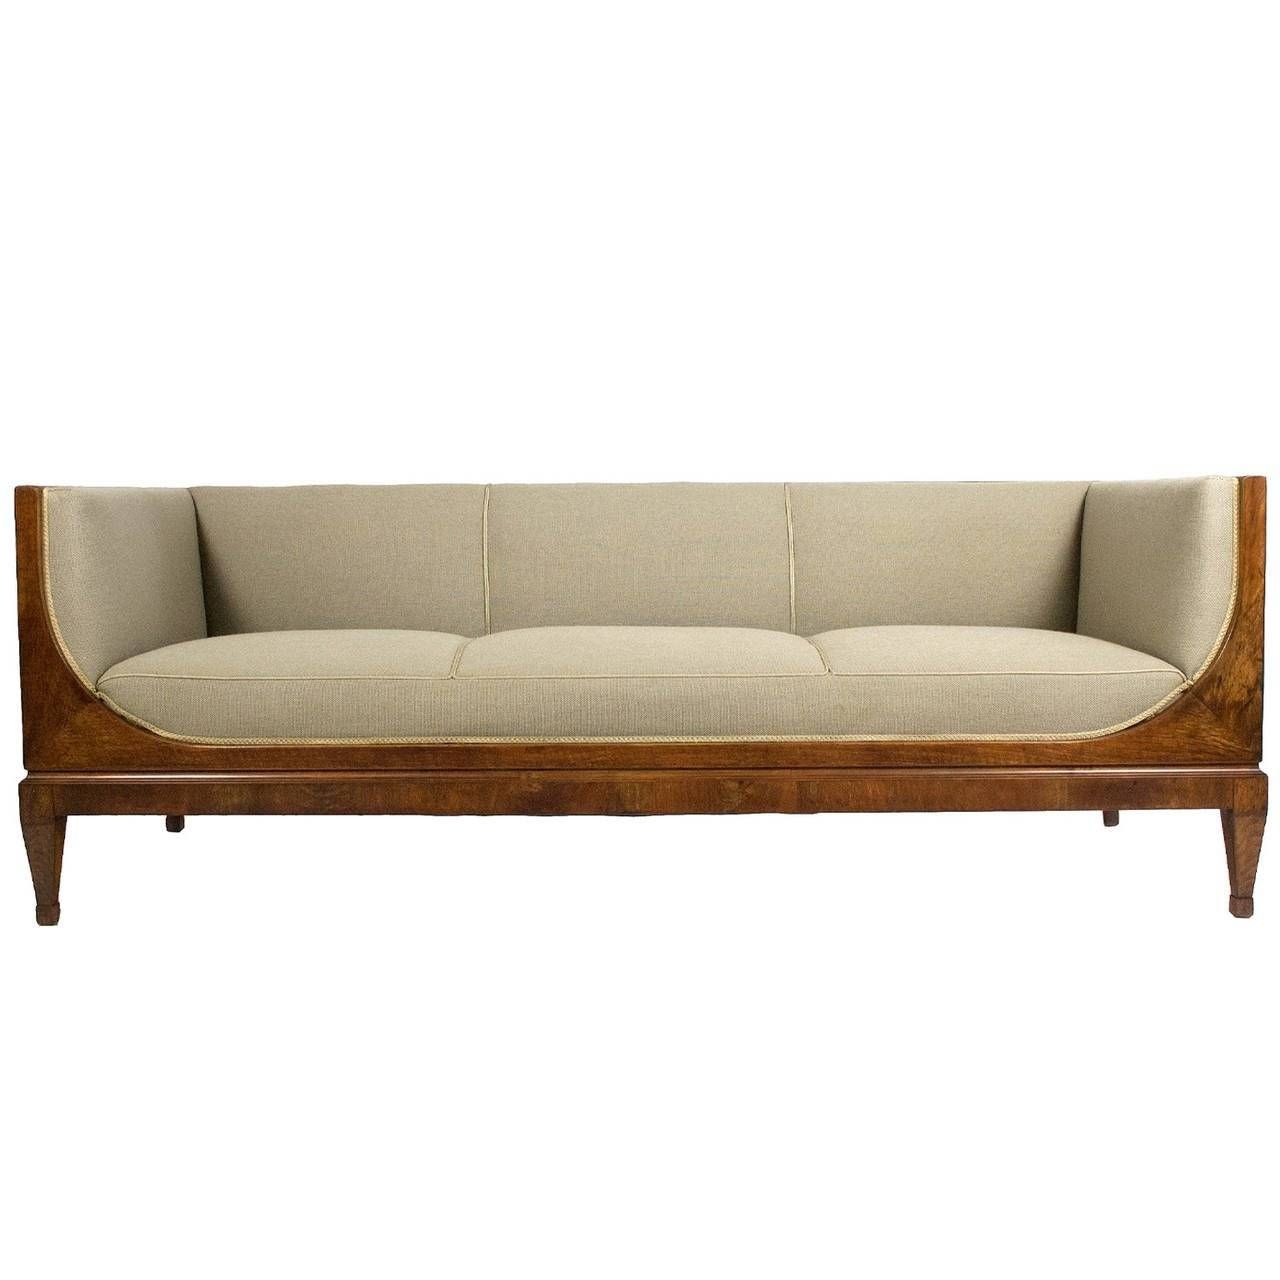 Frits Henningsen Neoclassical Sofa, 1930s At 1stdibs With Regard To 1930s Couch (View 15 of 30)